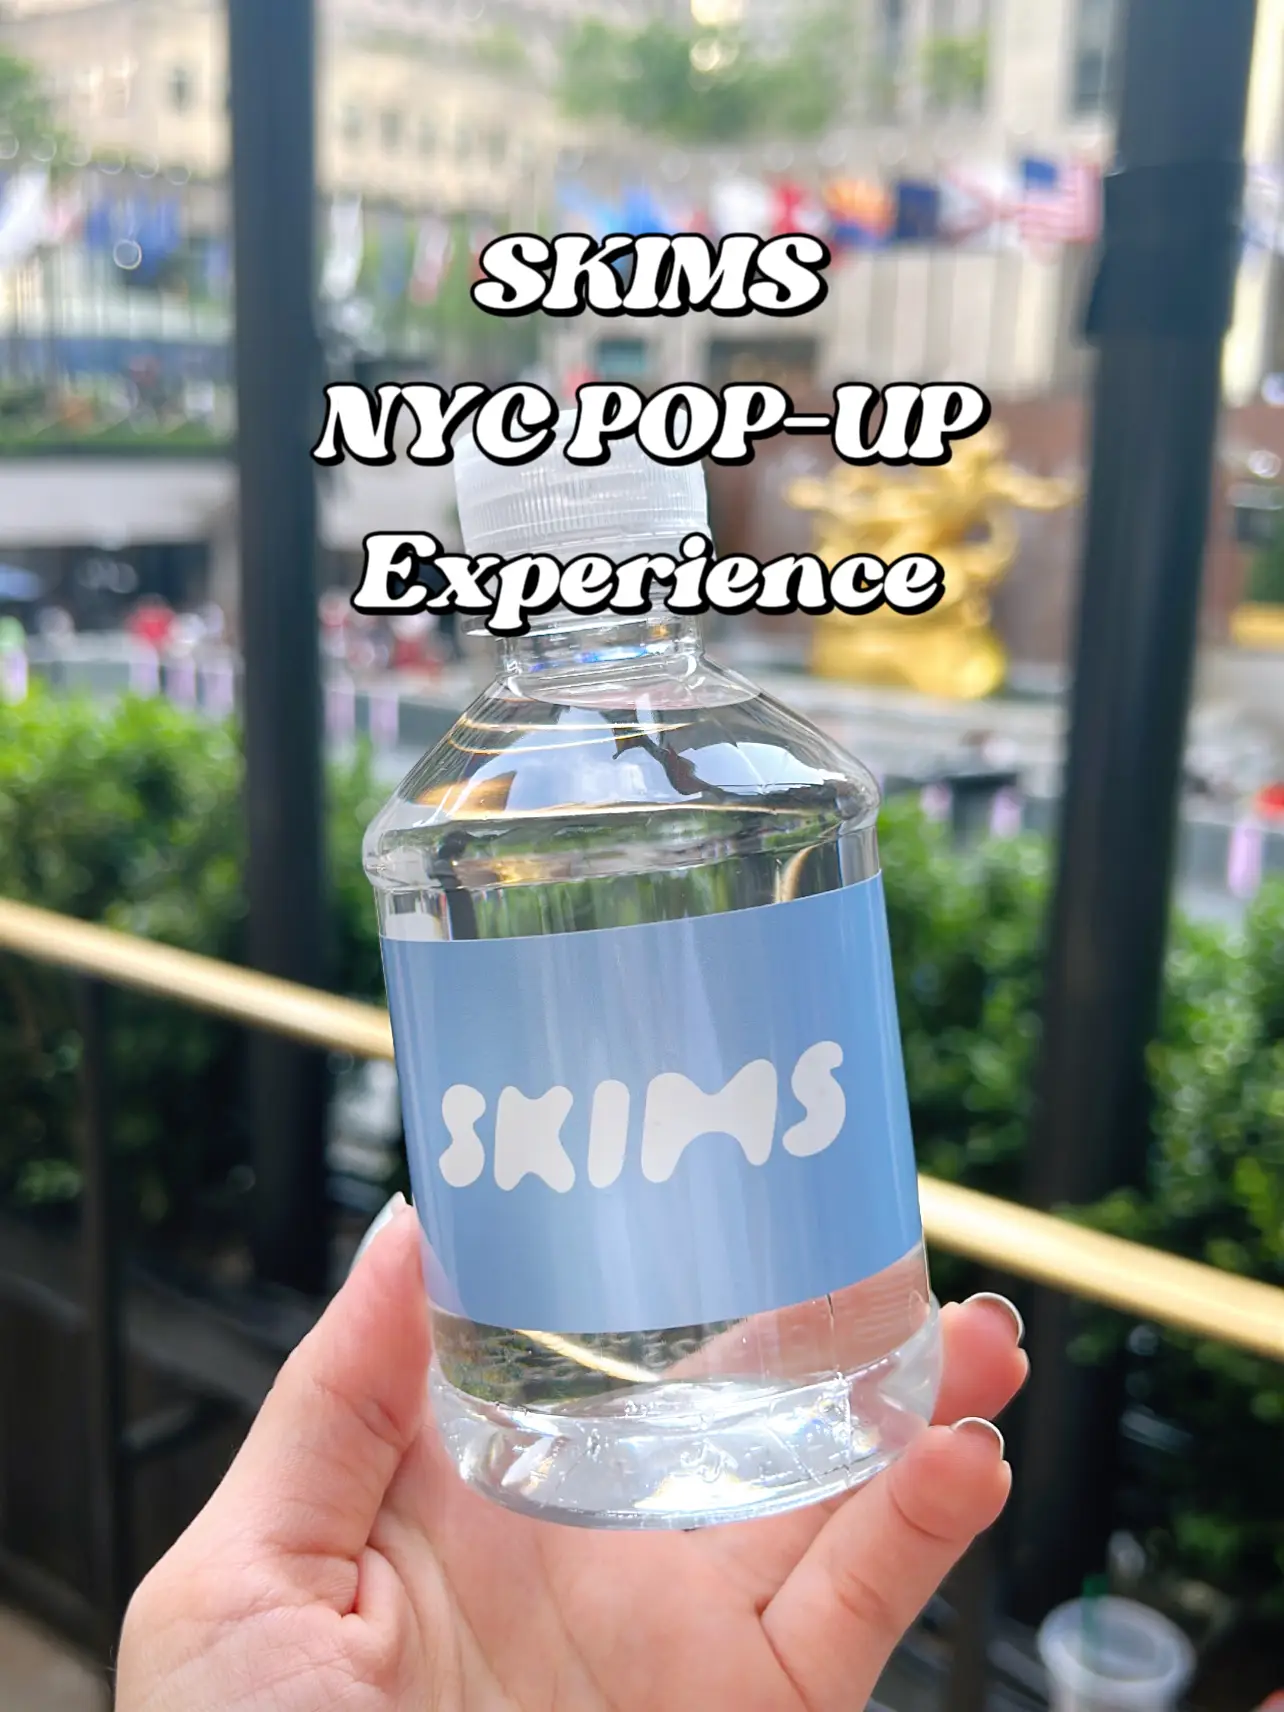 come to the @SKIMS pop up in nyc with me ❤️‍🔥 reservations are